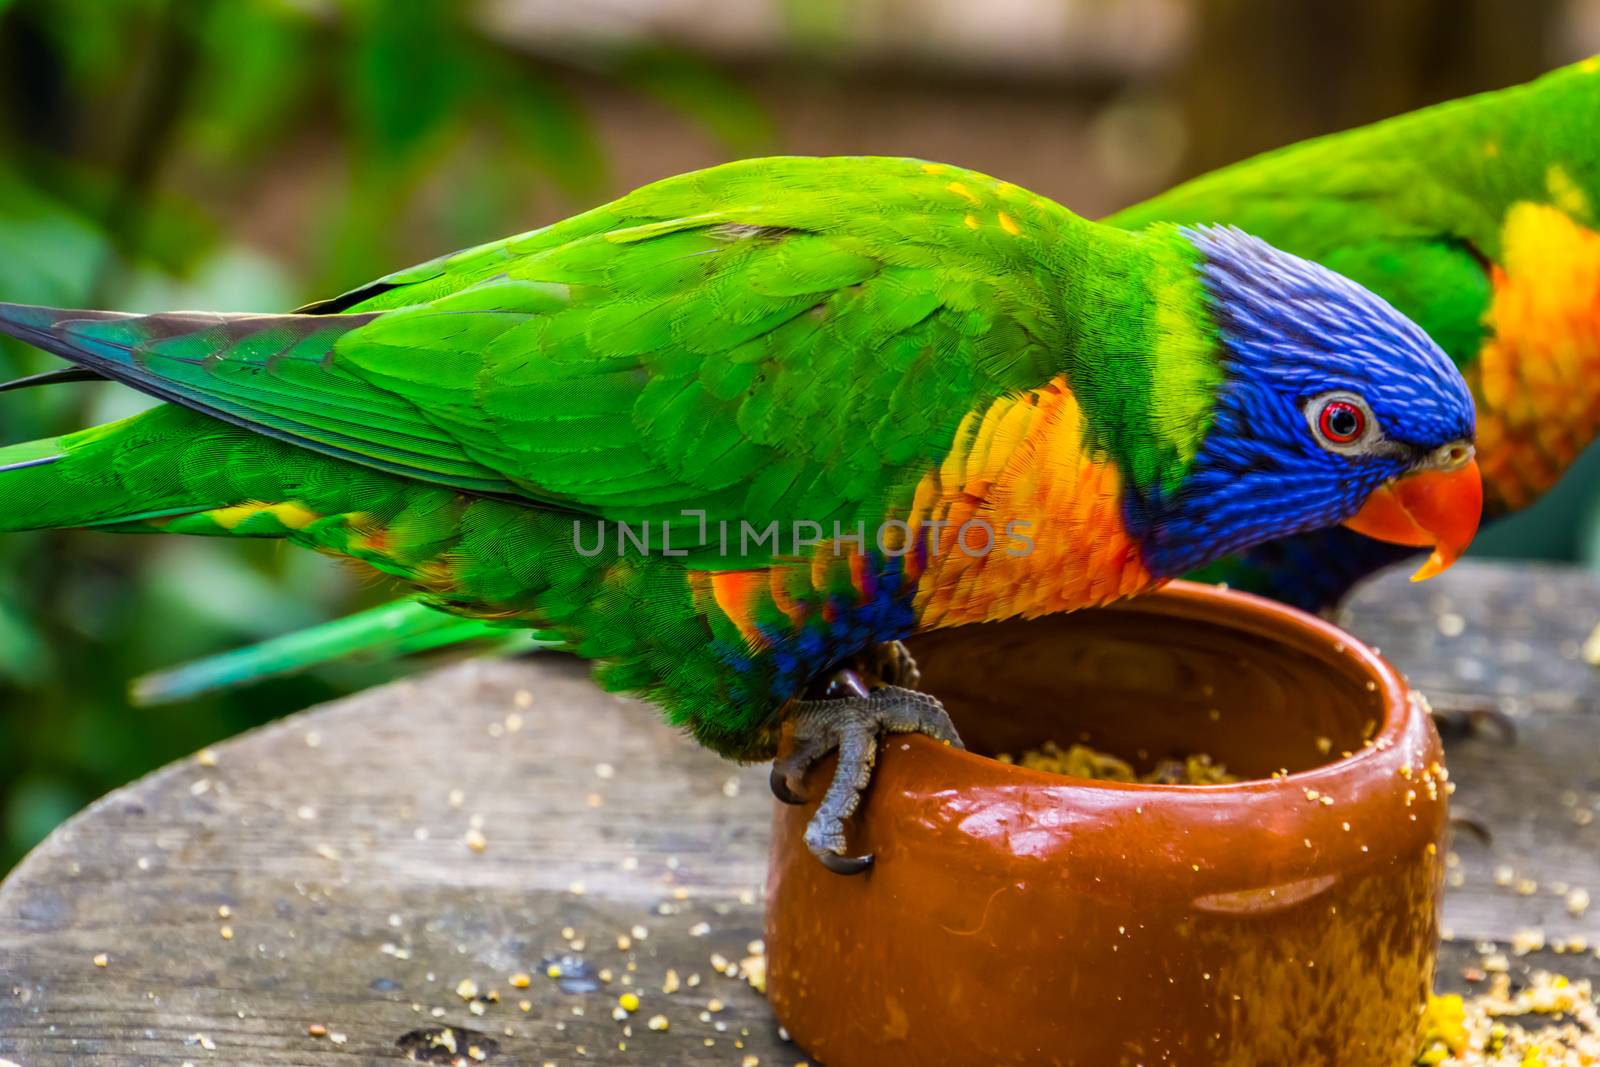 closeup of a rainbow lorikeet eating from a feeding bowl, bird diet, Tropical animal specie from Australia